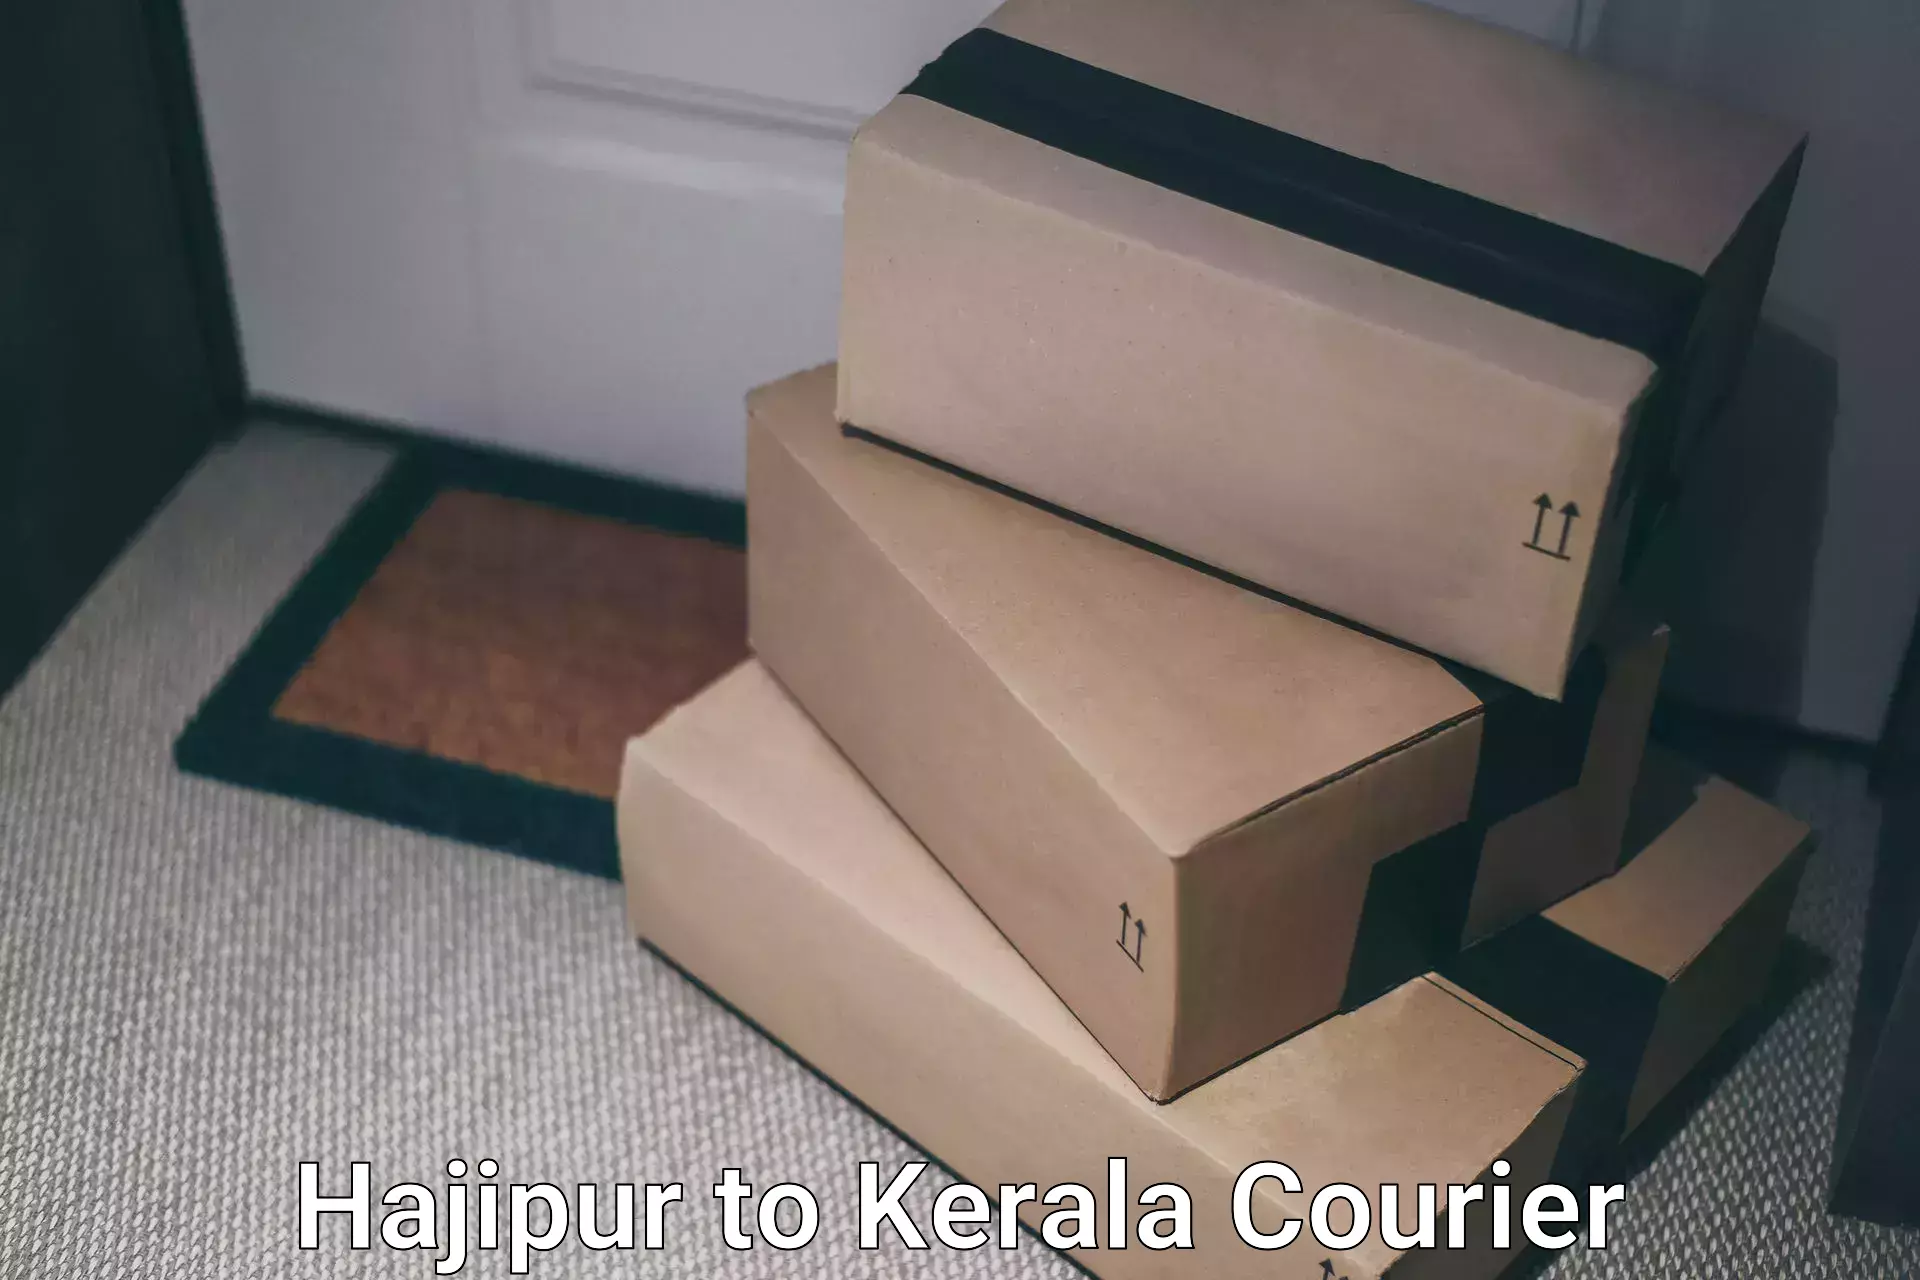 Fast delivery service Hajipur to Pathanamthitta